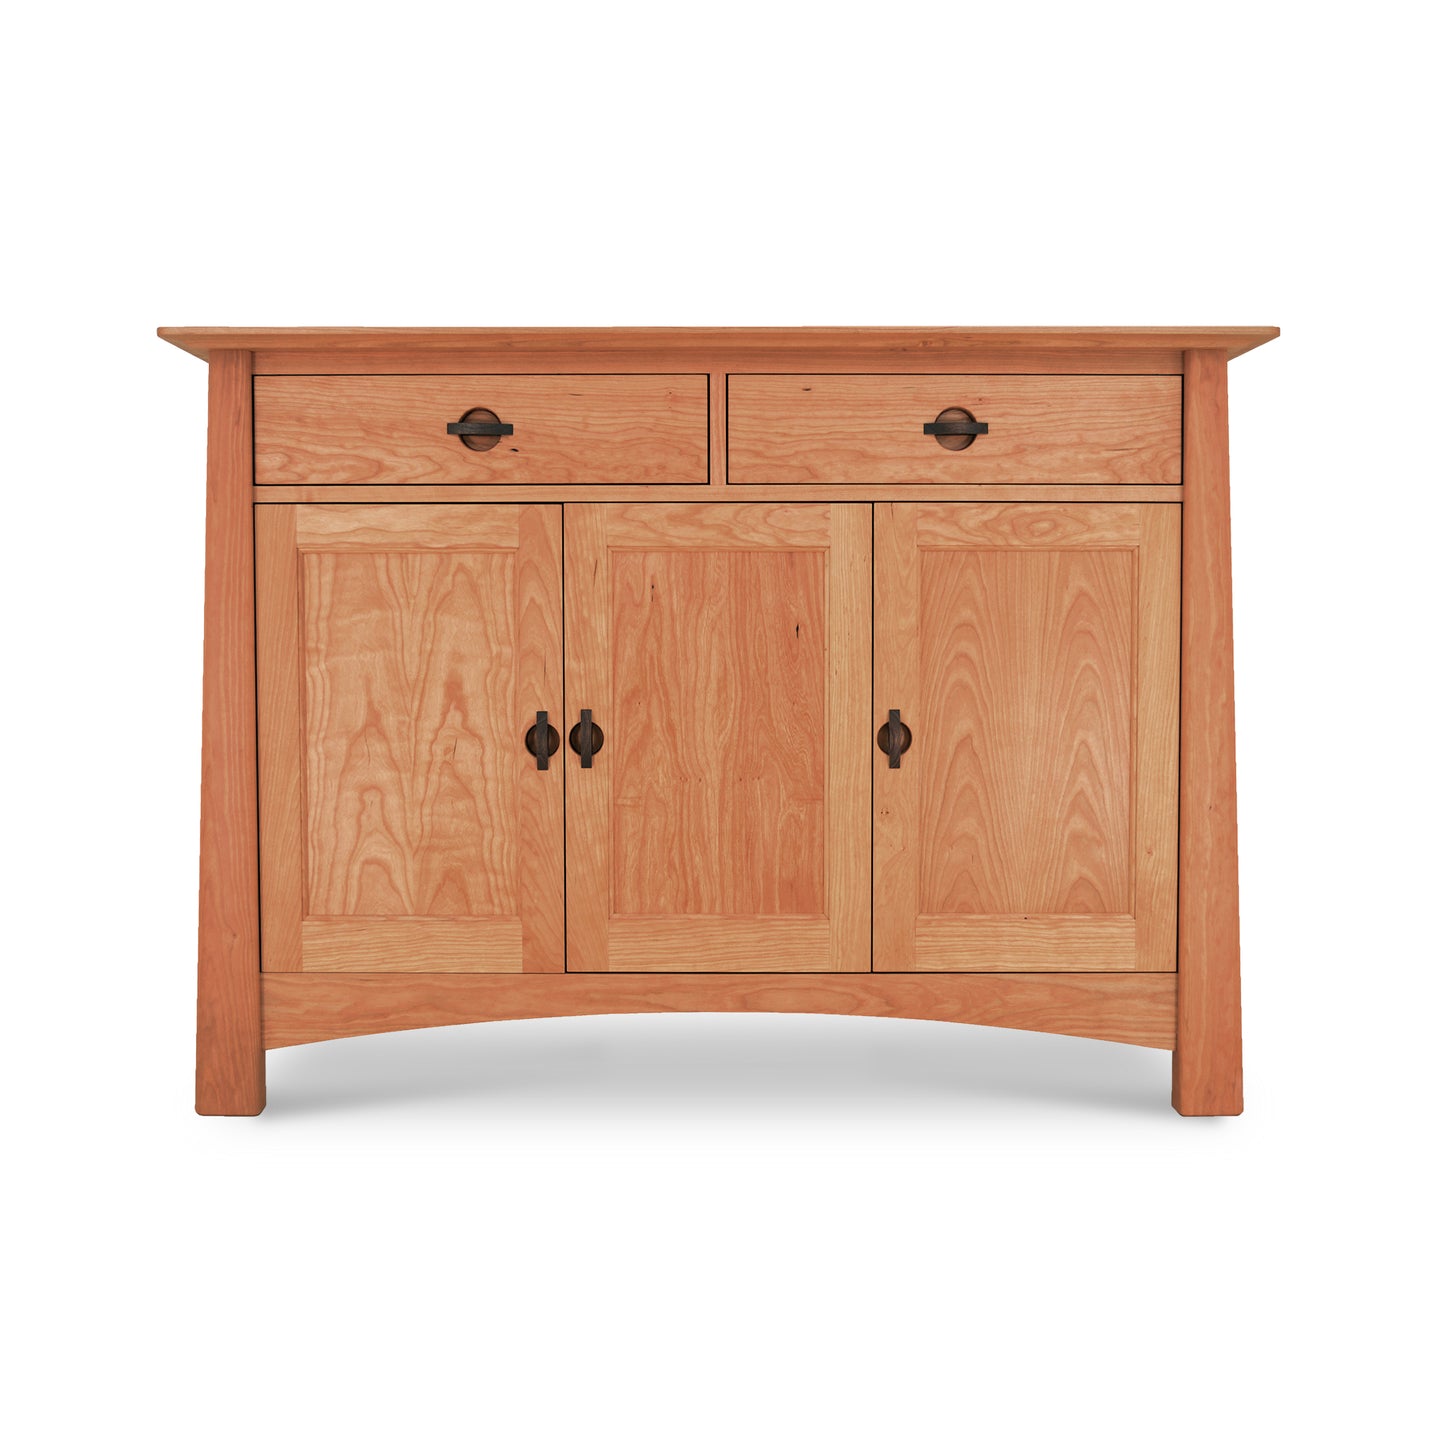 The Cherry Moon Medium Sideboard, handcrafted by Maple Corner Woodworks, is a luxurious addition to any kitchen or dining room. With two drawers and two doors, this wooden sideboard